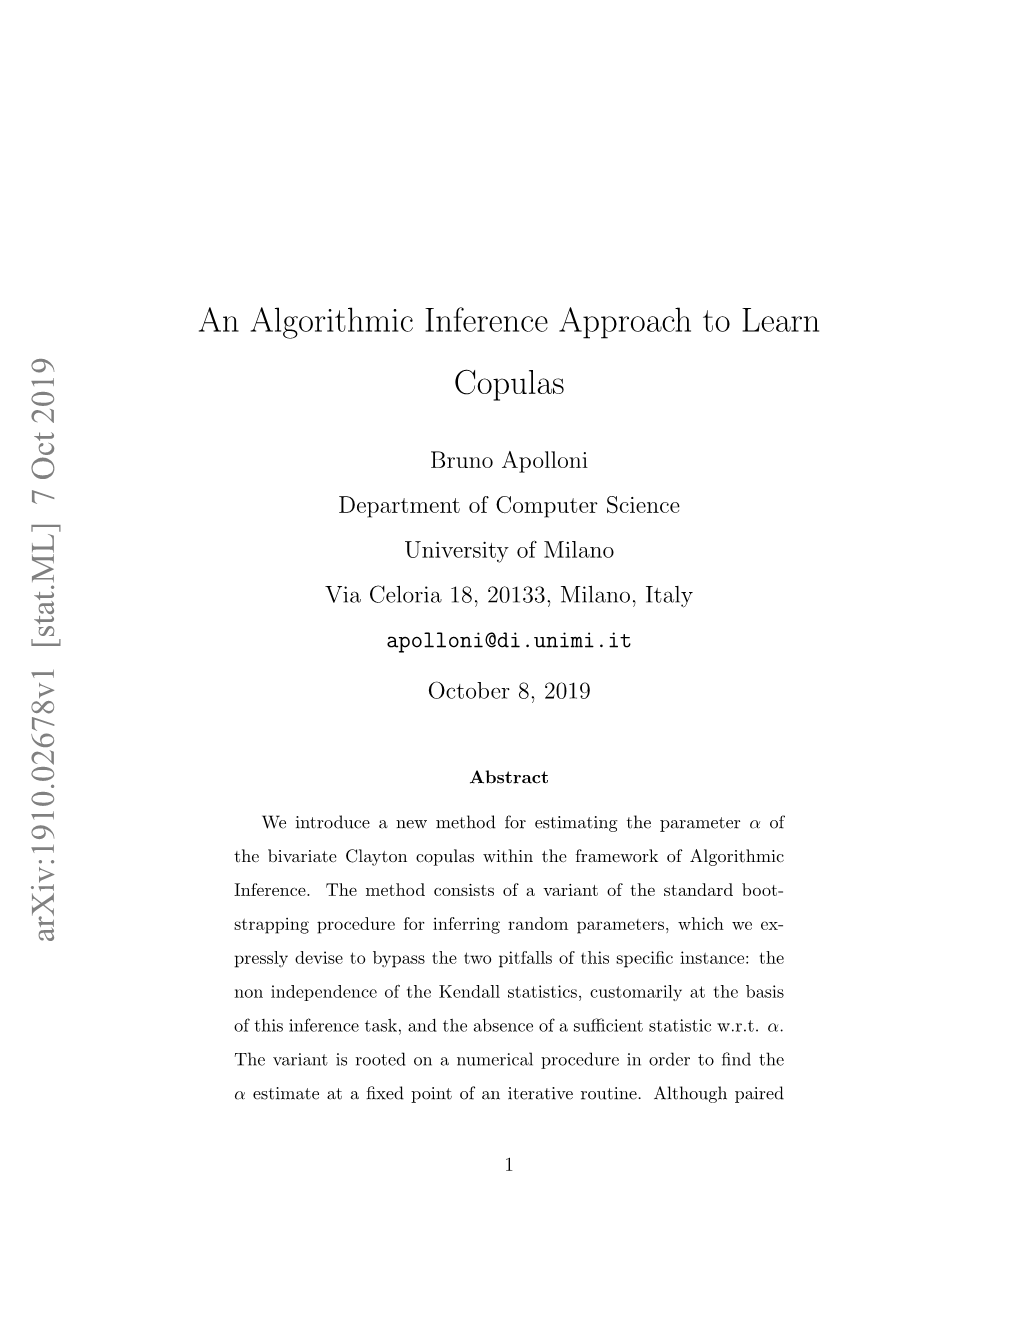 An Algorithmic Inference Approach to Learn Copulas Arxiv:1910.02678V1